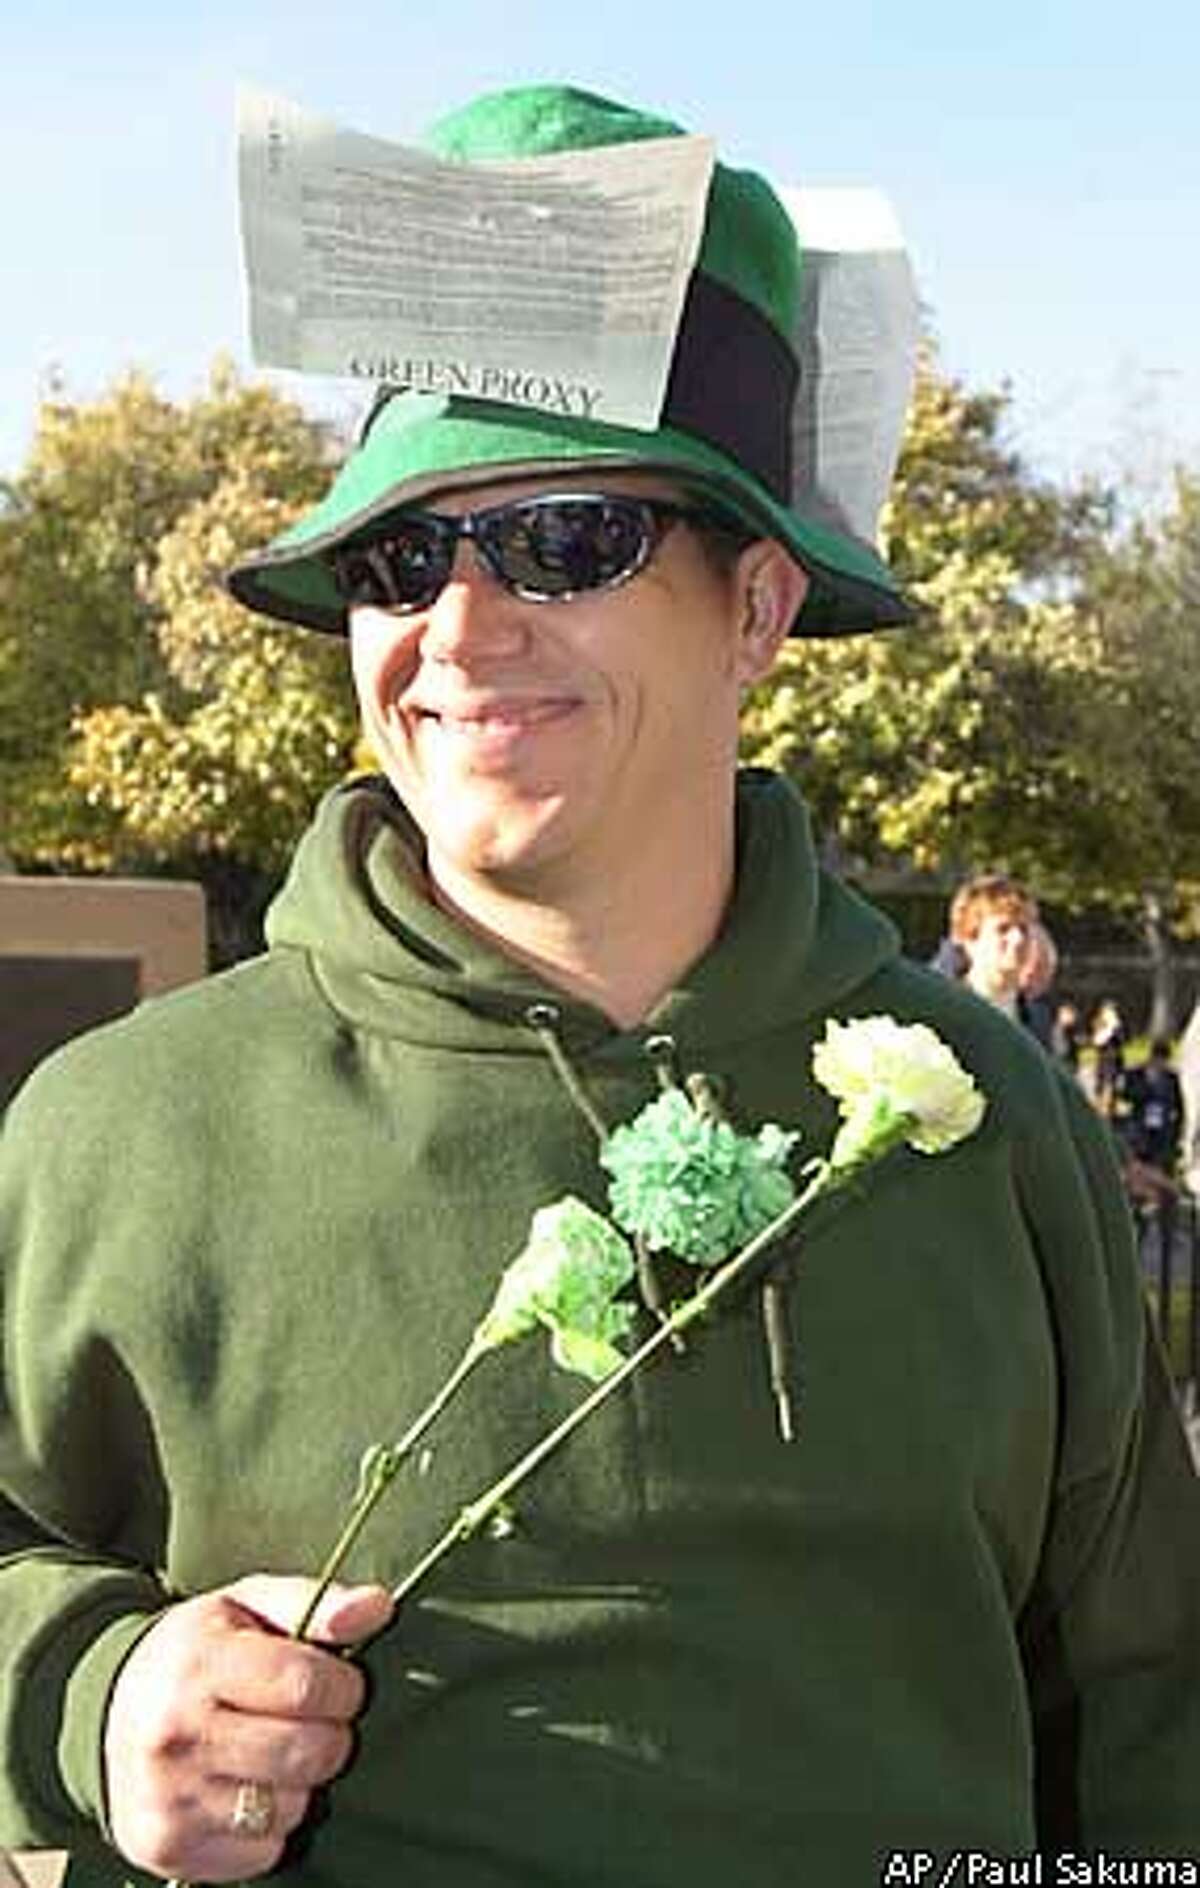 Hewlett Packard Company shareholder Lyle Ohm, of Livermore, Calif., smiles as he wears a Green Proxy card and passes out green flowers to HP shareholders before the meeting in Cupertino, Calif., Tuesday, March 19, 2002. The proxy fight over the $21 billion acquisition of Compaq Computer Corp. by HP gave individual investors a rare chance to directly influence the fate of two companies. HP's shareholder vote on the deal Tuesday. The Green Proxy was against the merger. (AP Photo/Paul Sakuma)